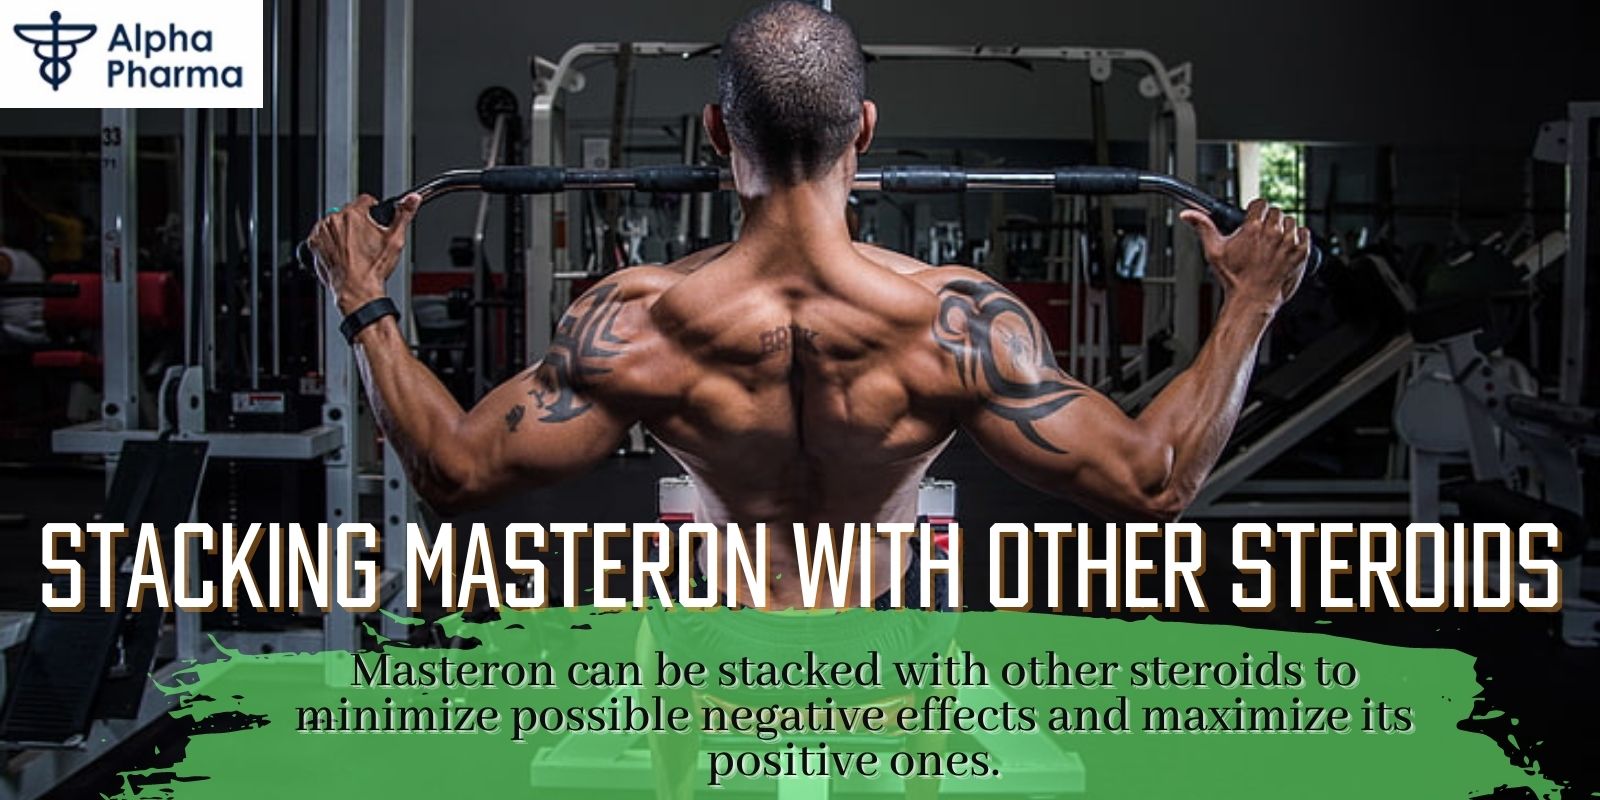 Stacking Masteron with other steroids